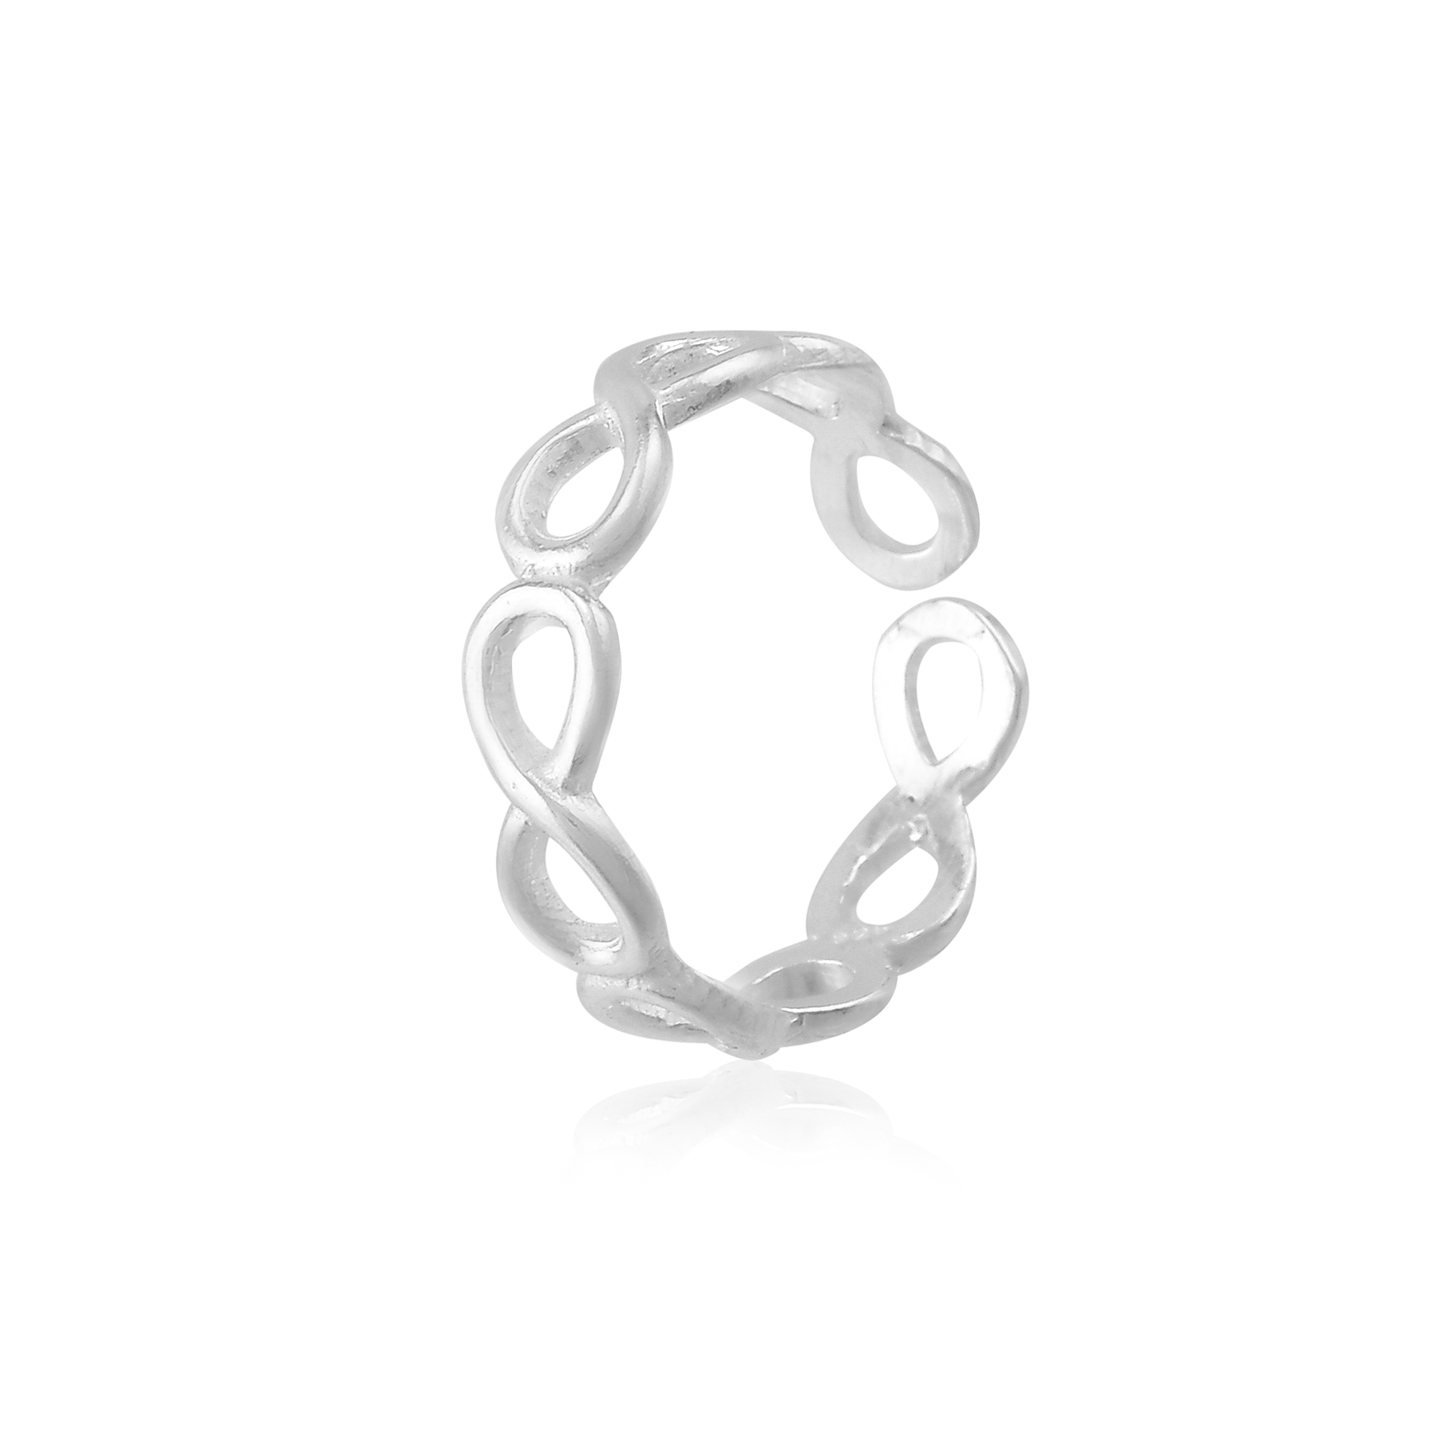 Adjustable Light Weight Infinity Sterling Silver 925 Ring For Women